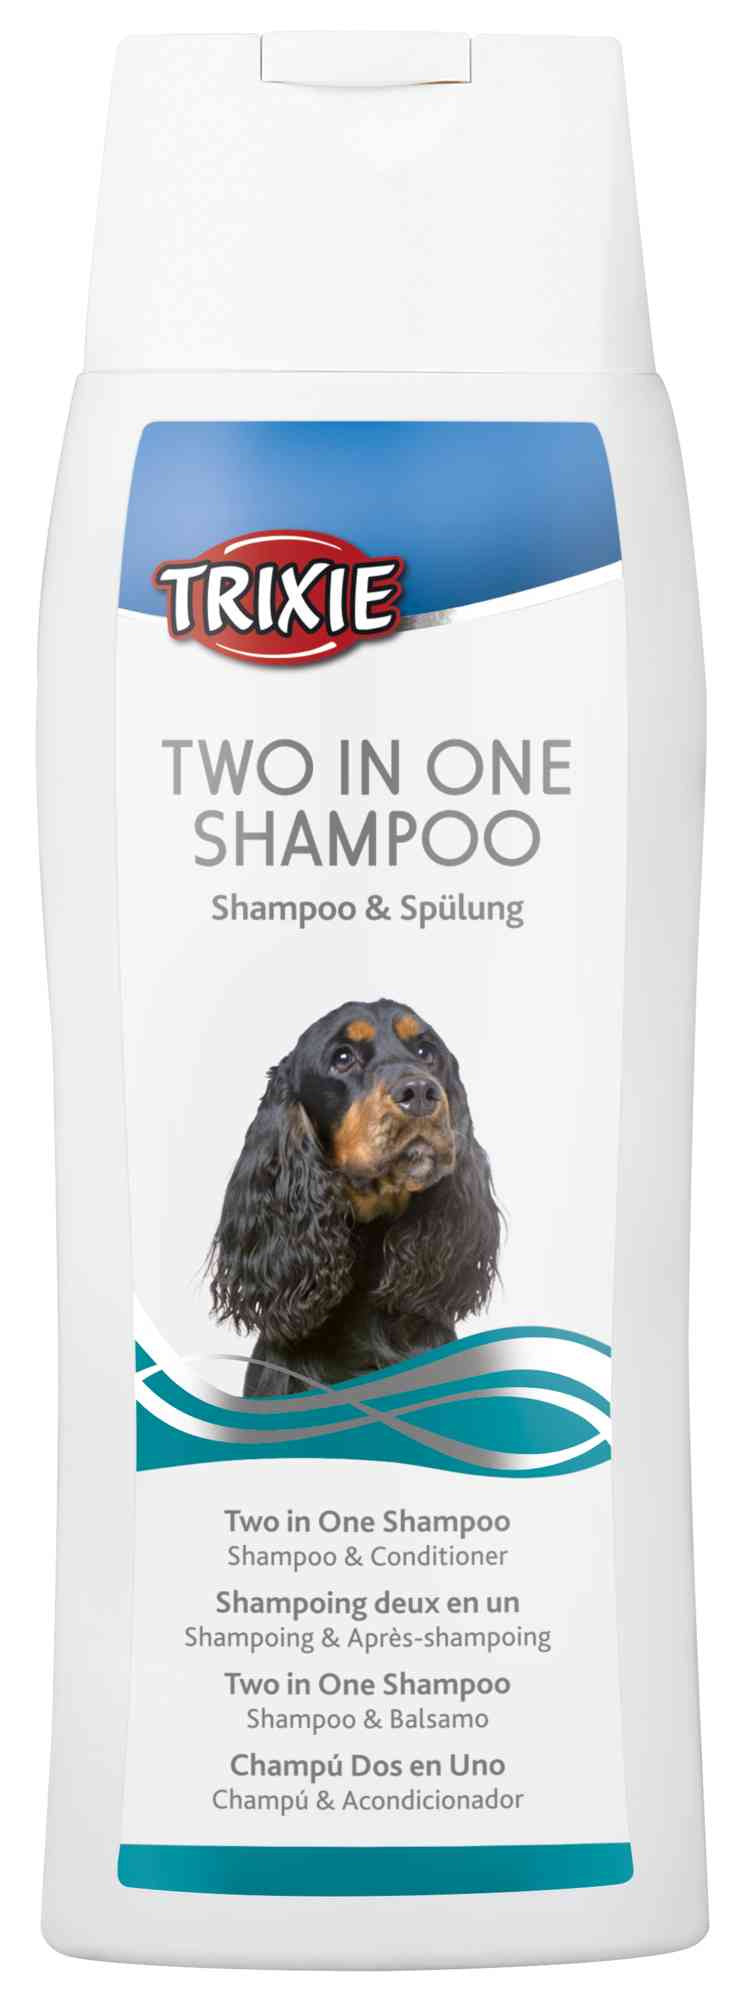 Two in One Shampoo